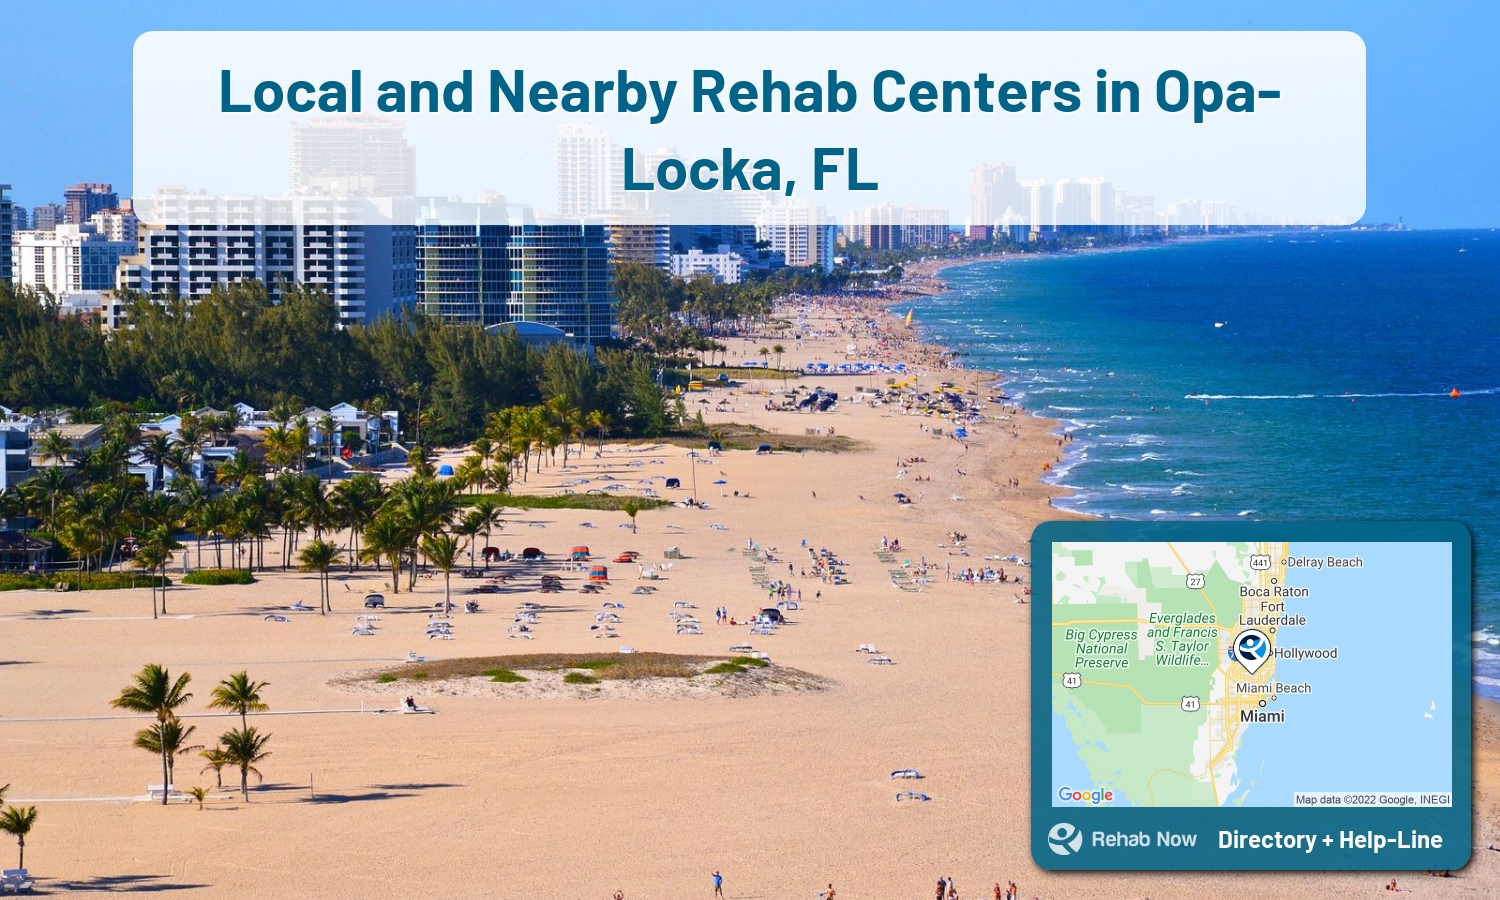 Opa-Locka, FL Treatment Centers. Find drug rehab in Opa-Locka, Florida, or detox and treatment programs. Get the right help now!